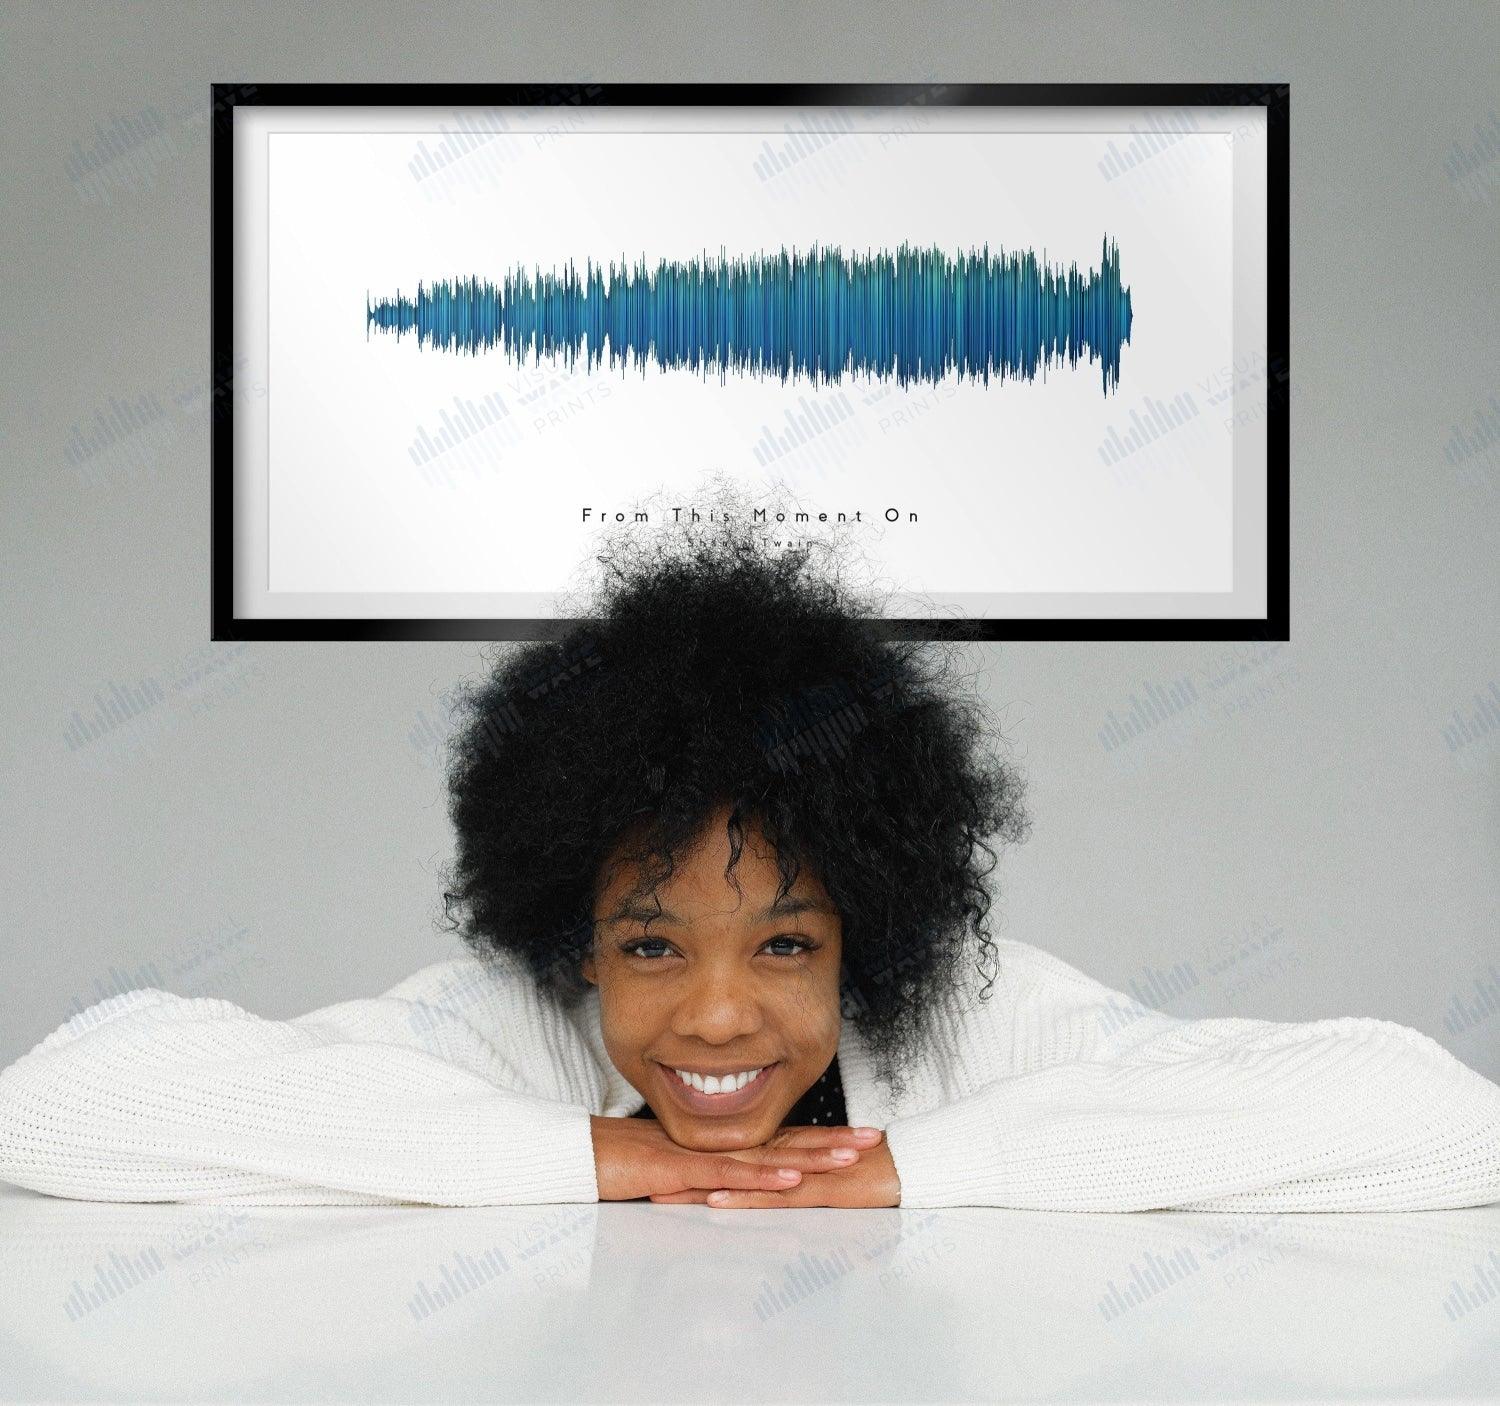 From This Moment On by Shania Twain - Visual Wave Prints